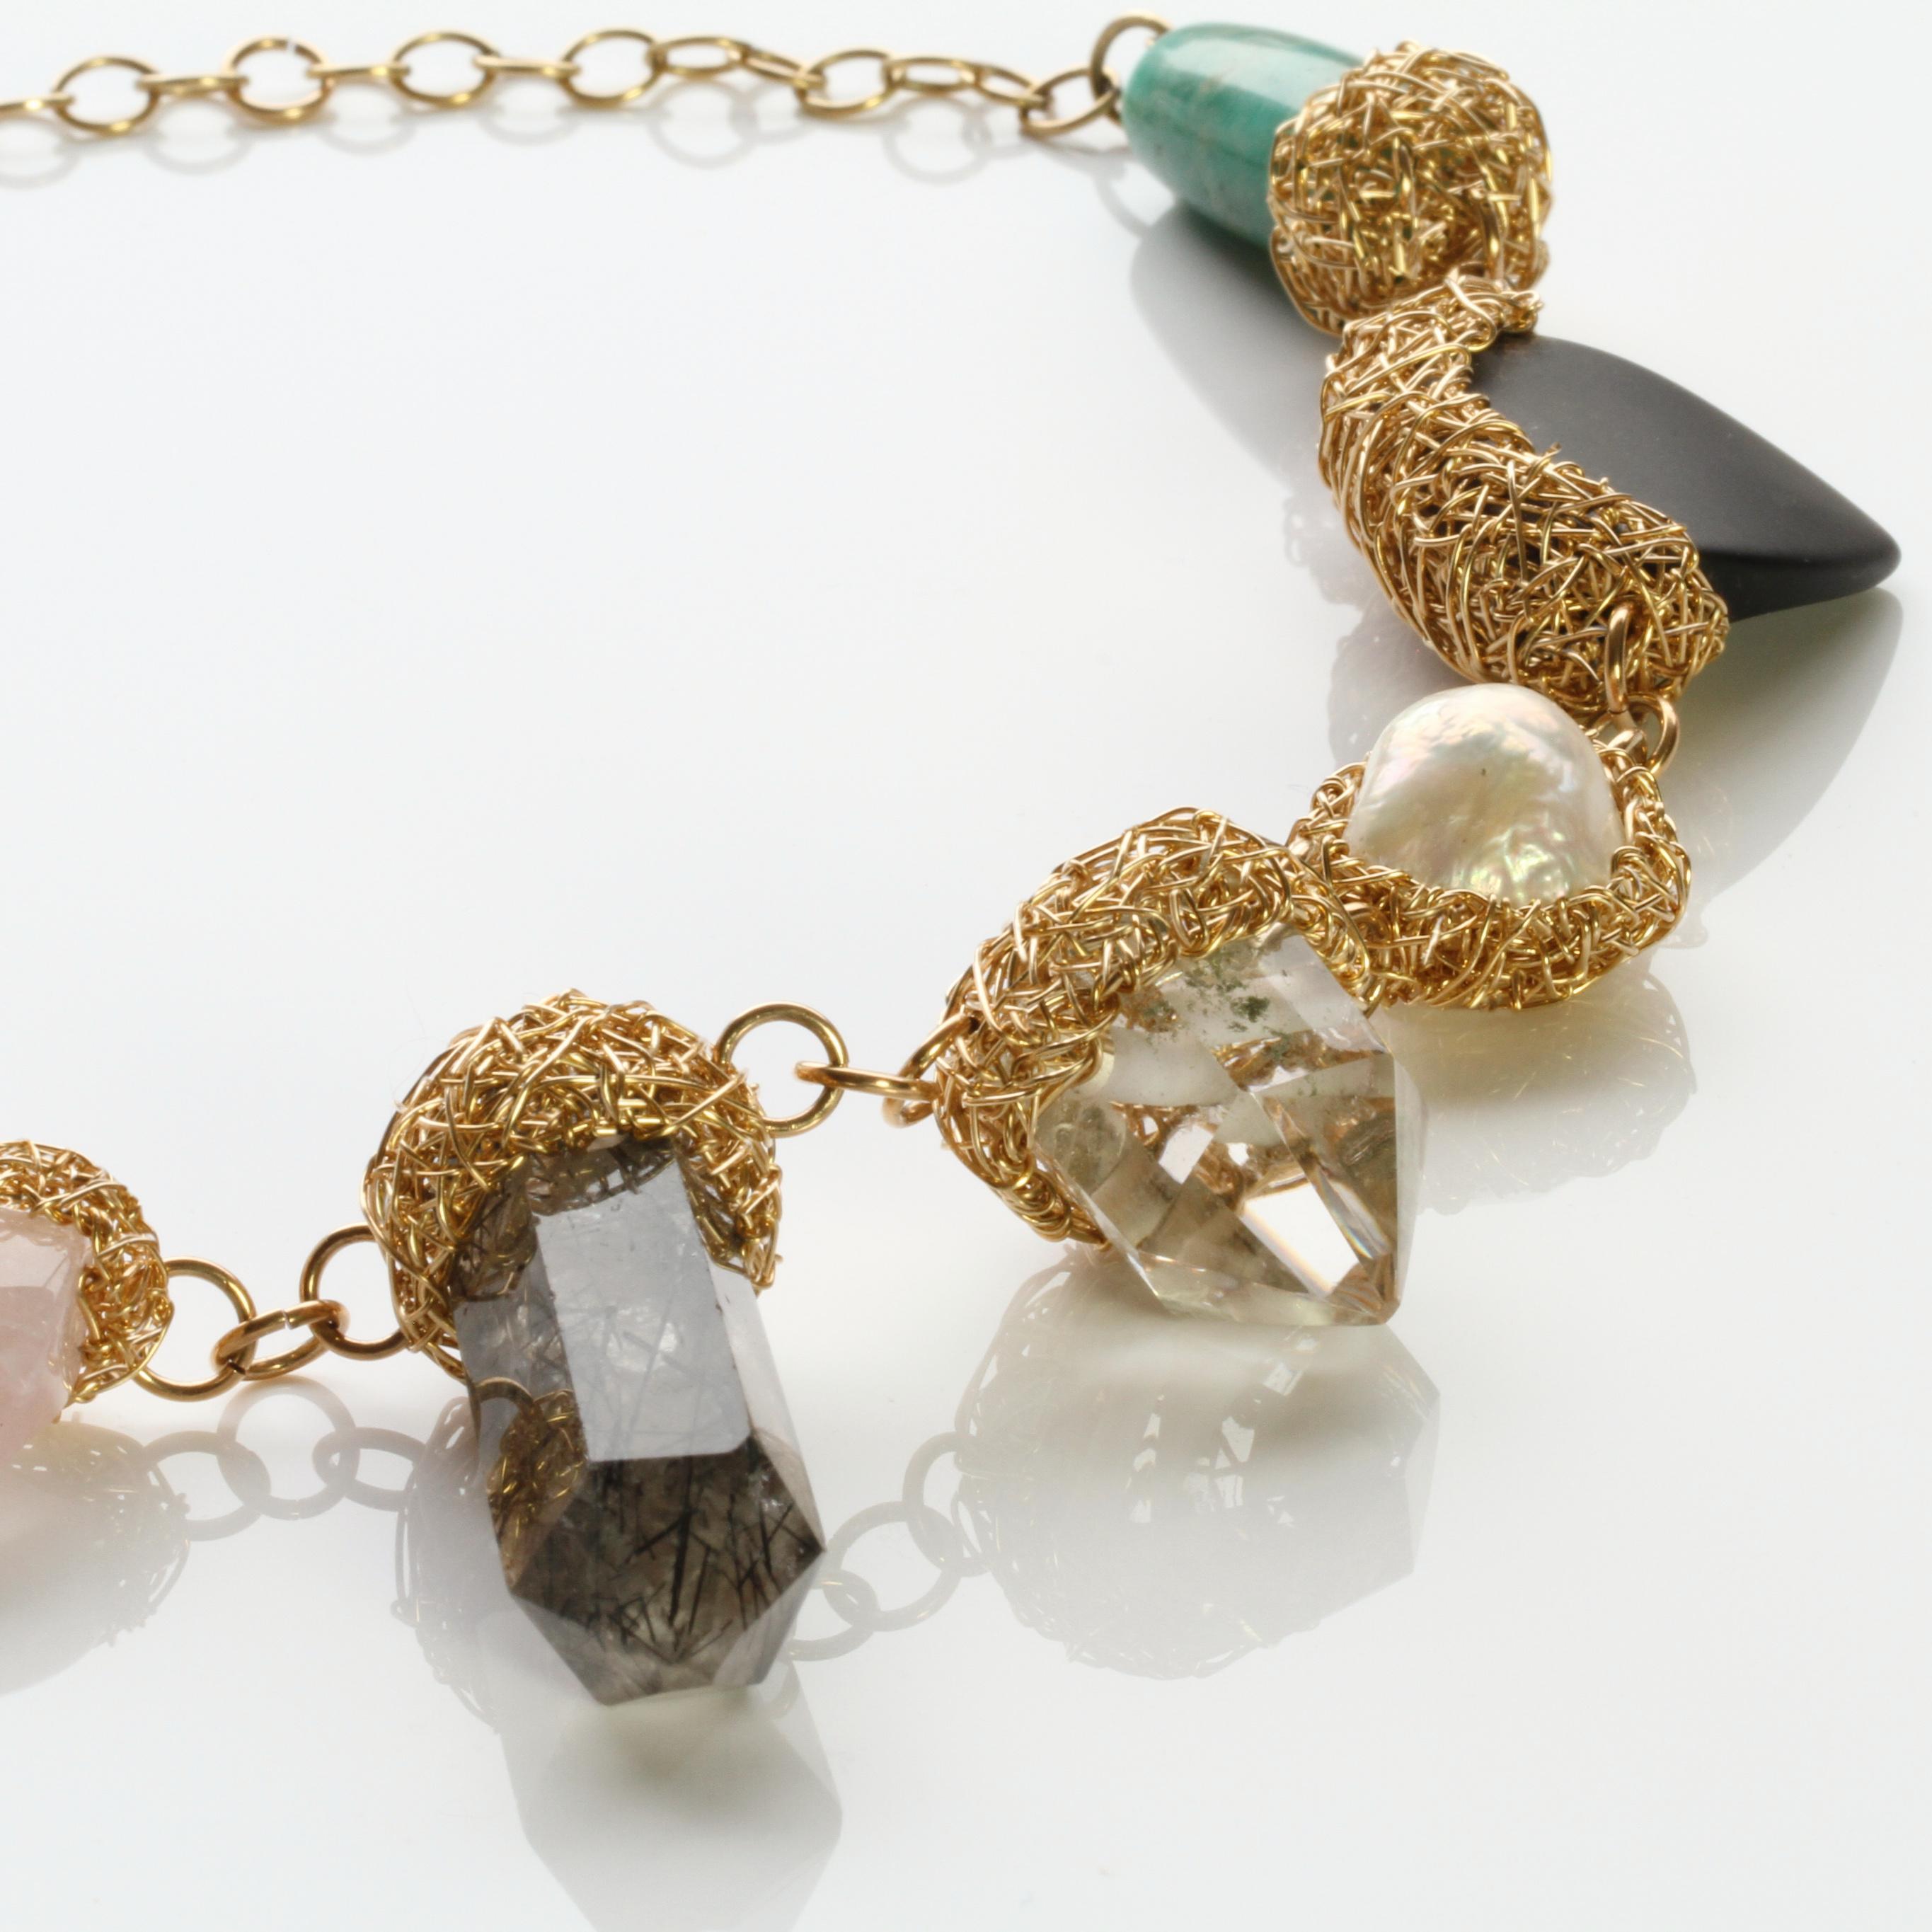 necklaces with semi-precious stones and pearls